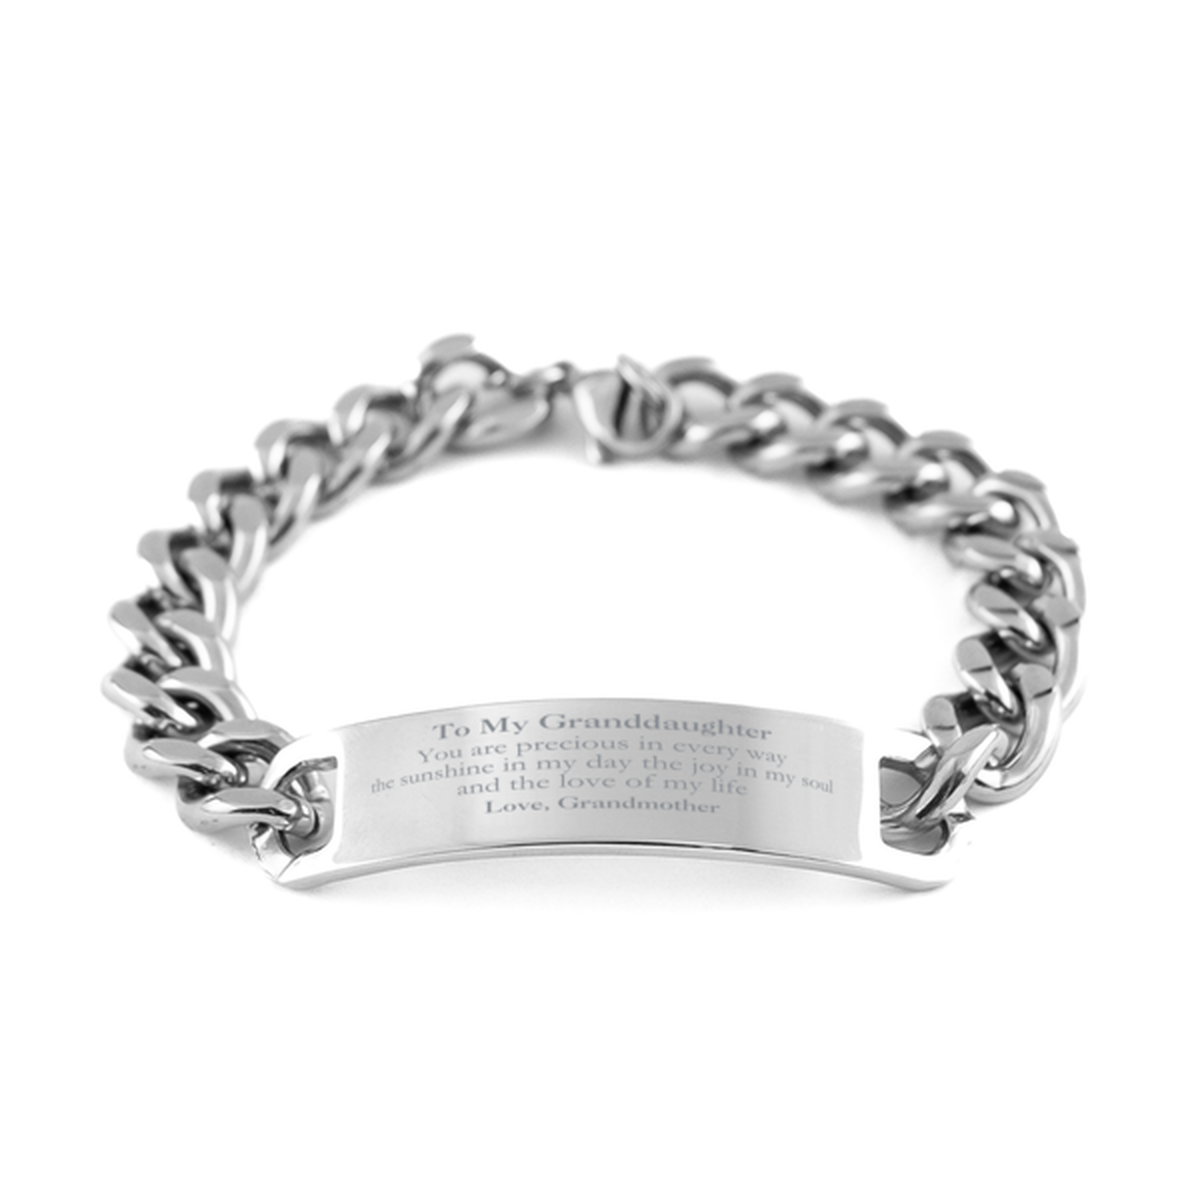 Graduation Gifts for Granddaughter Cuban Chain Stainless Steel Bracelet Present from Grandmother, Christmas Granddaughter Birthday Gifts Granddaughter You are precious in every way the sunshine in my day. Love, Grandmother